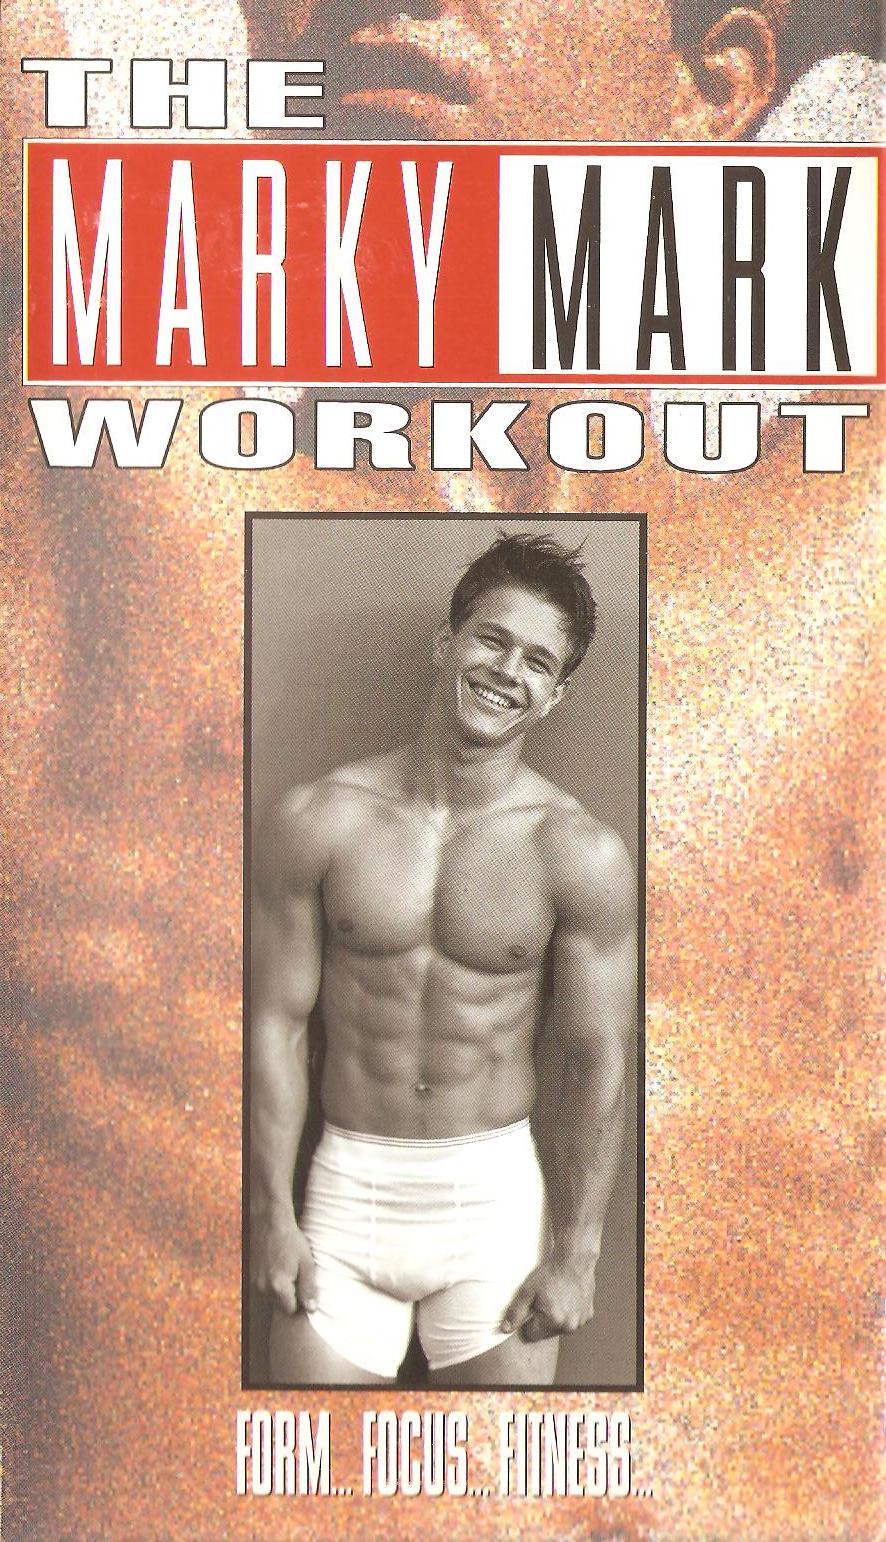 C-List Celebrity Workouts: Mark Wahlberg – The Marky Mark Workout